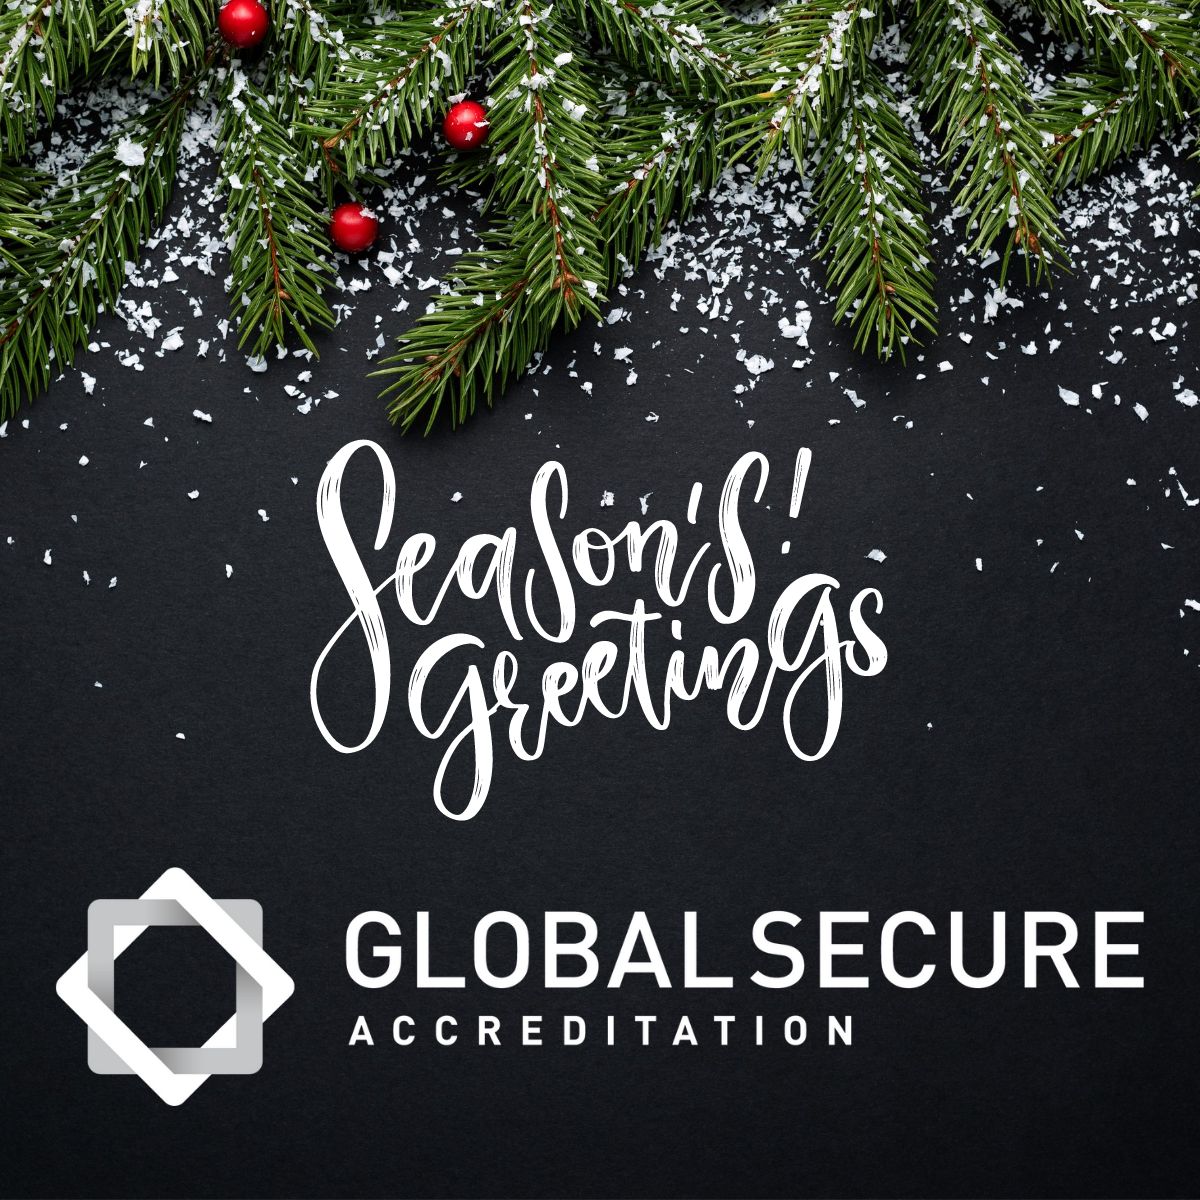 Happy holidays from us at Global Secure Accreditation! We hope you have a joyous festive period. And, most importantly, stay safe!

#TravelRisk #TRM #BestPractice #DutyOfCare #ISO31030 #BusinessTravel